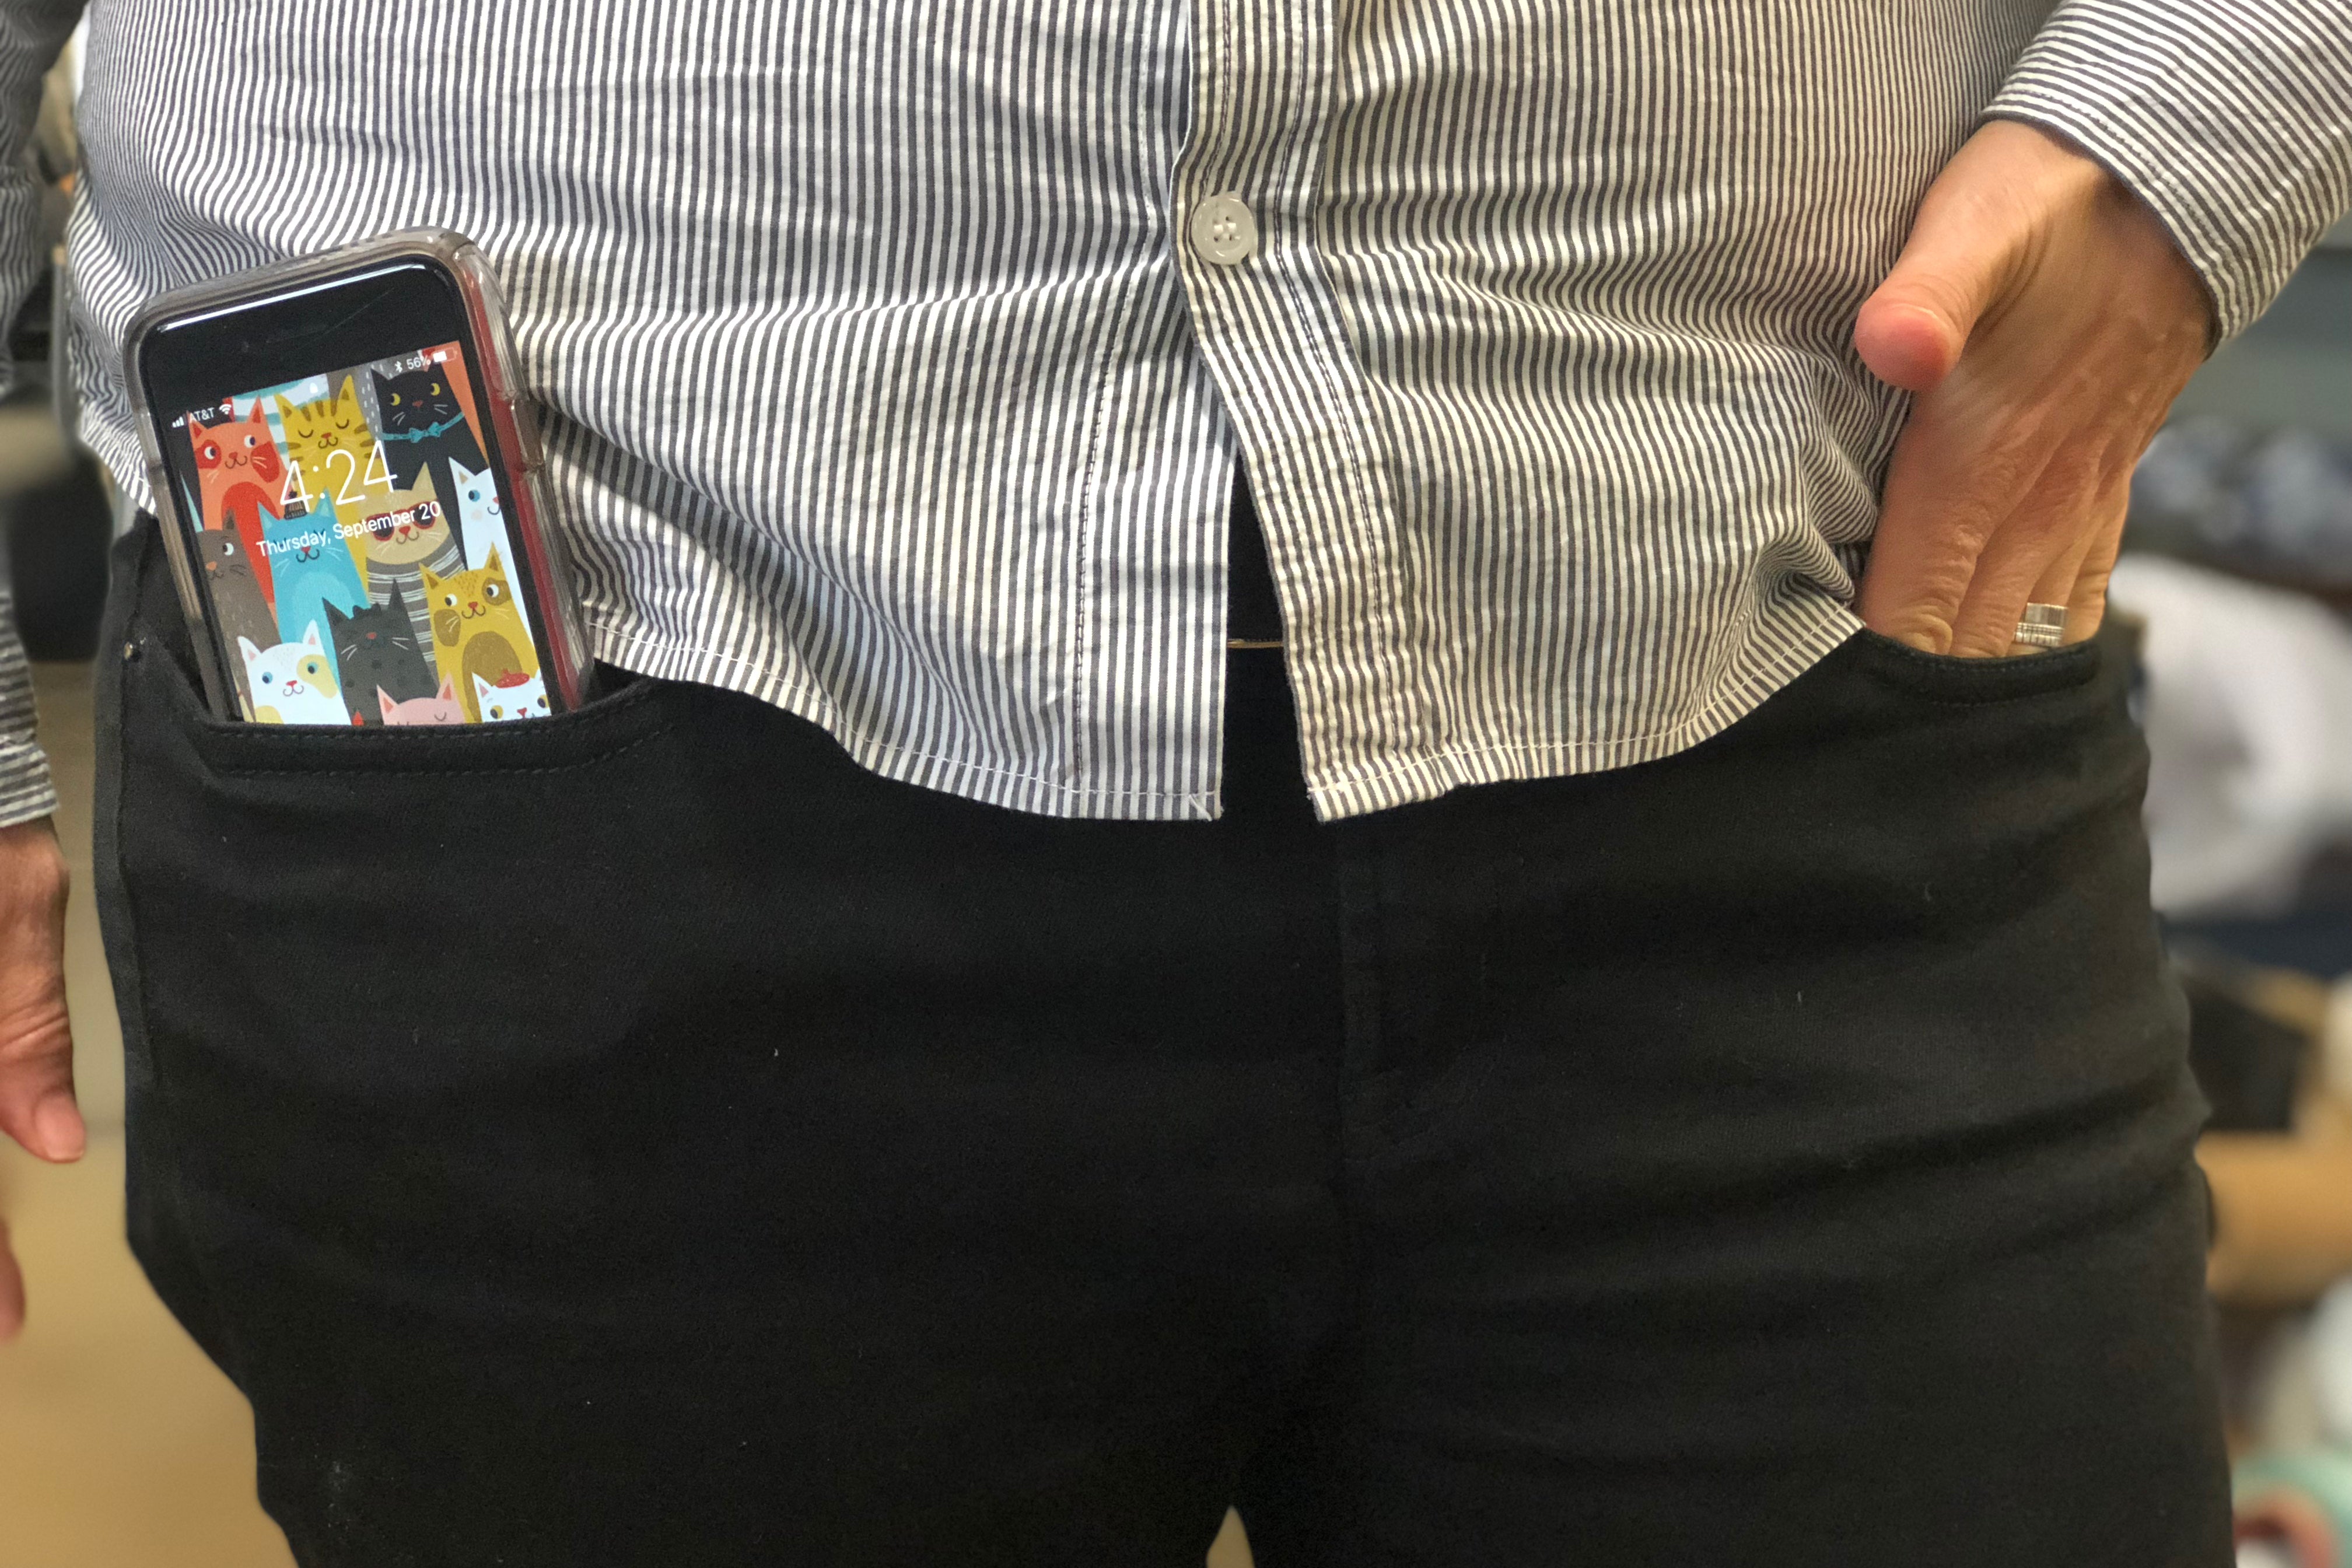 Fake pockets in women's clothing are just downright frustrating